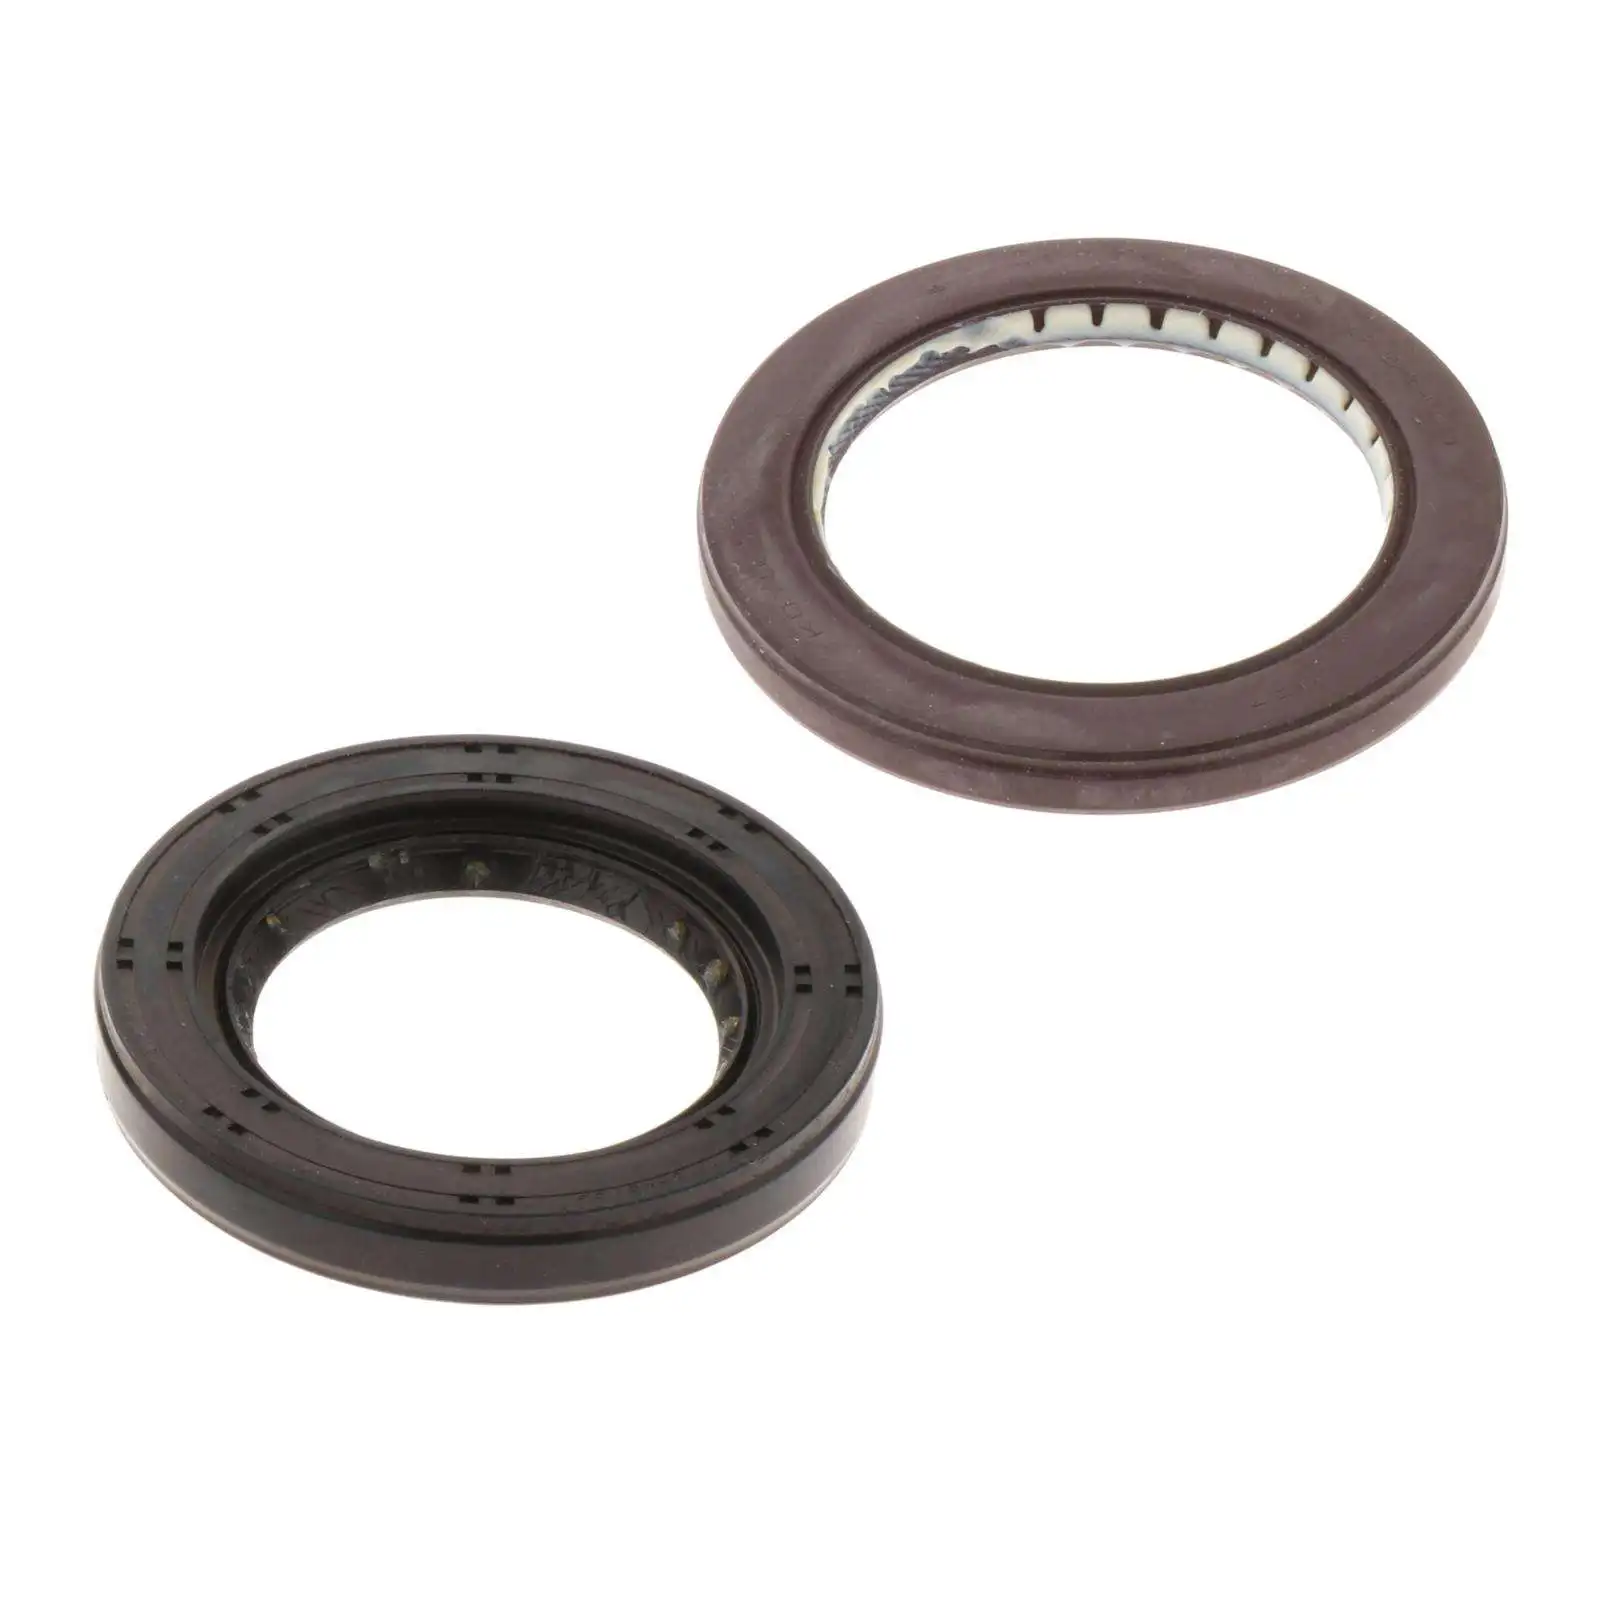 Oil Seal Durable Fit for 09G Transmission High Performance Direct Replaces Accessories